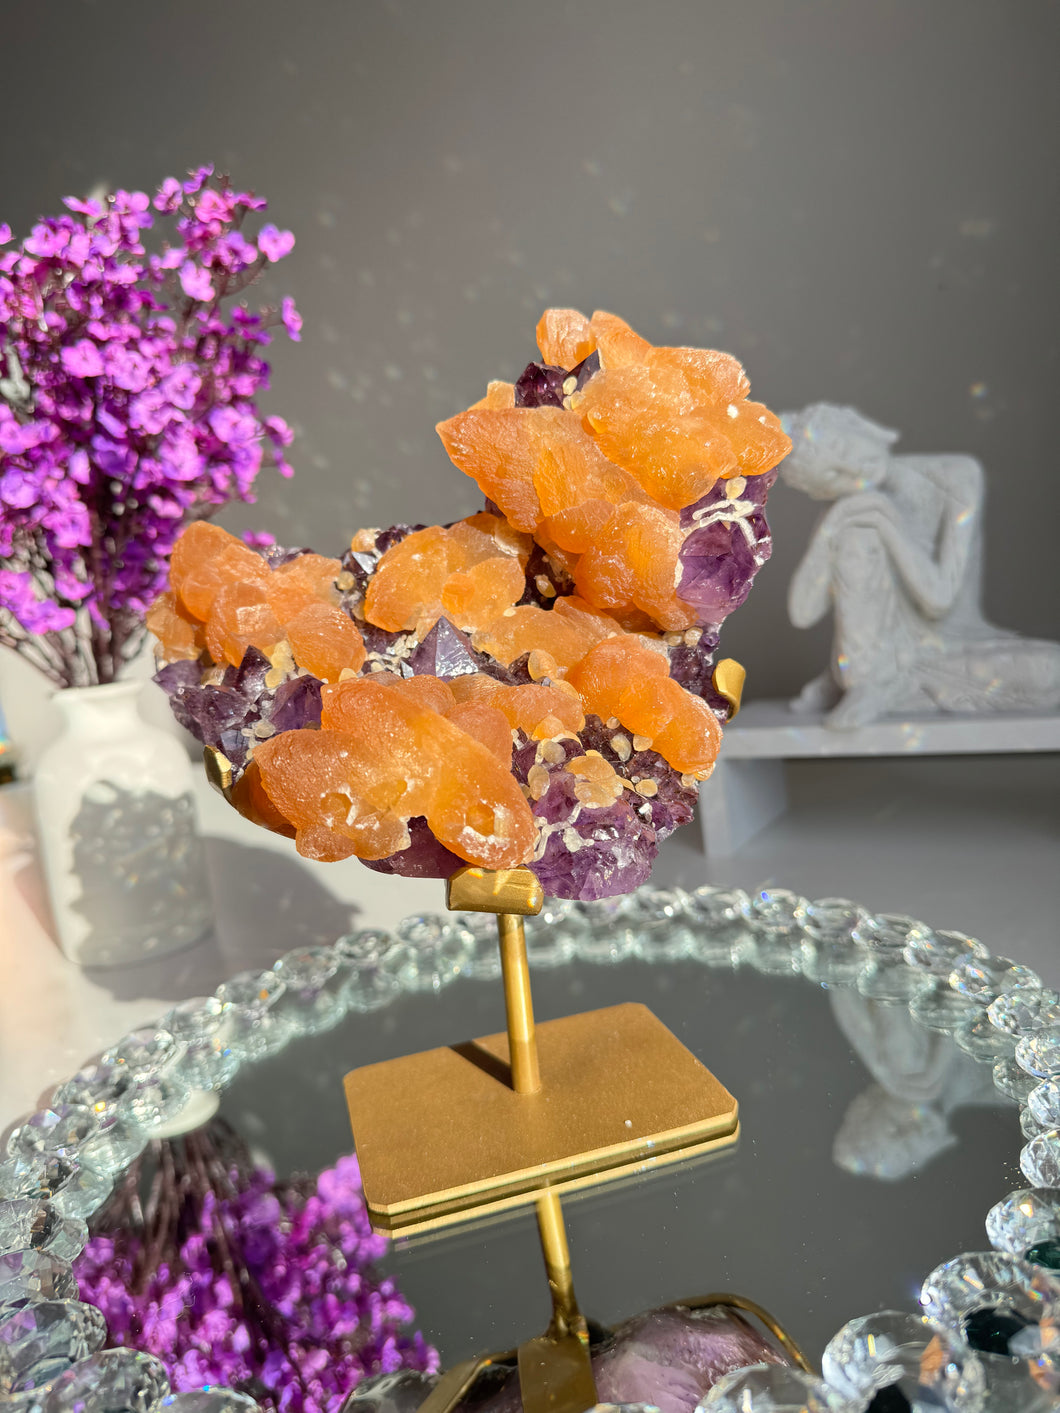 Amethyst cluster with orange calcite